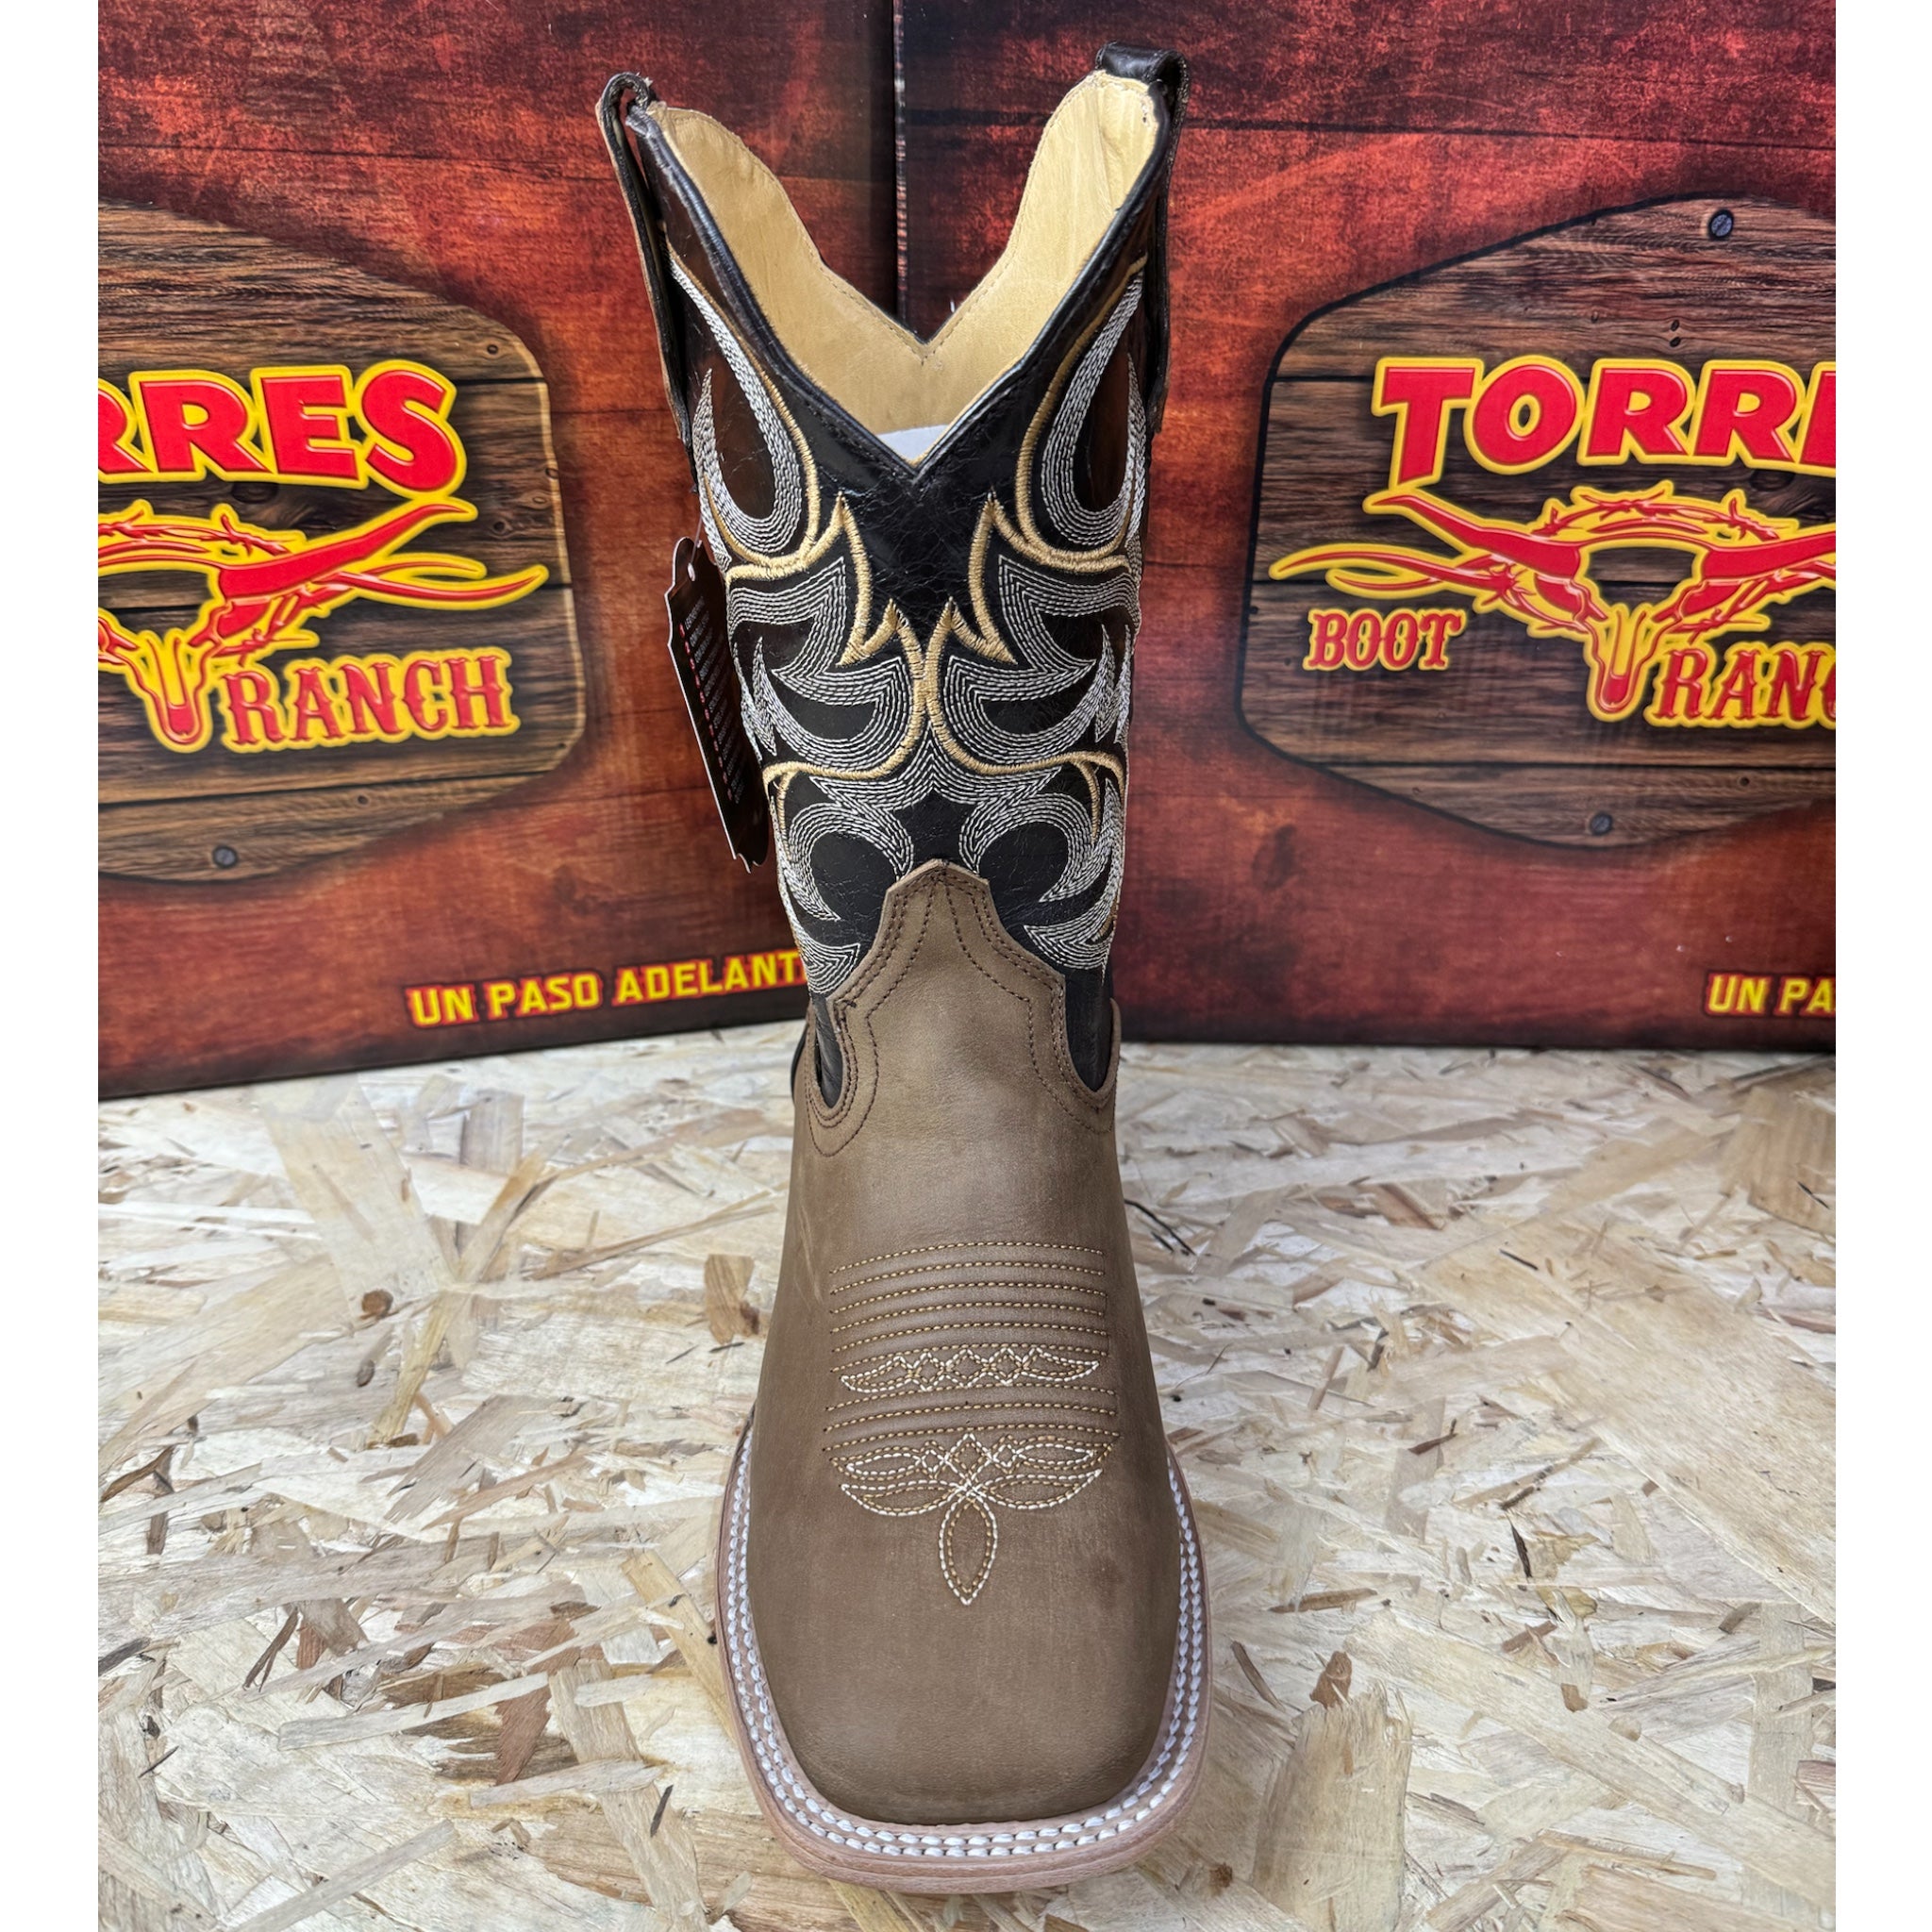 CRAZY TABACCO TORRES BOOT